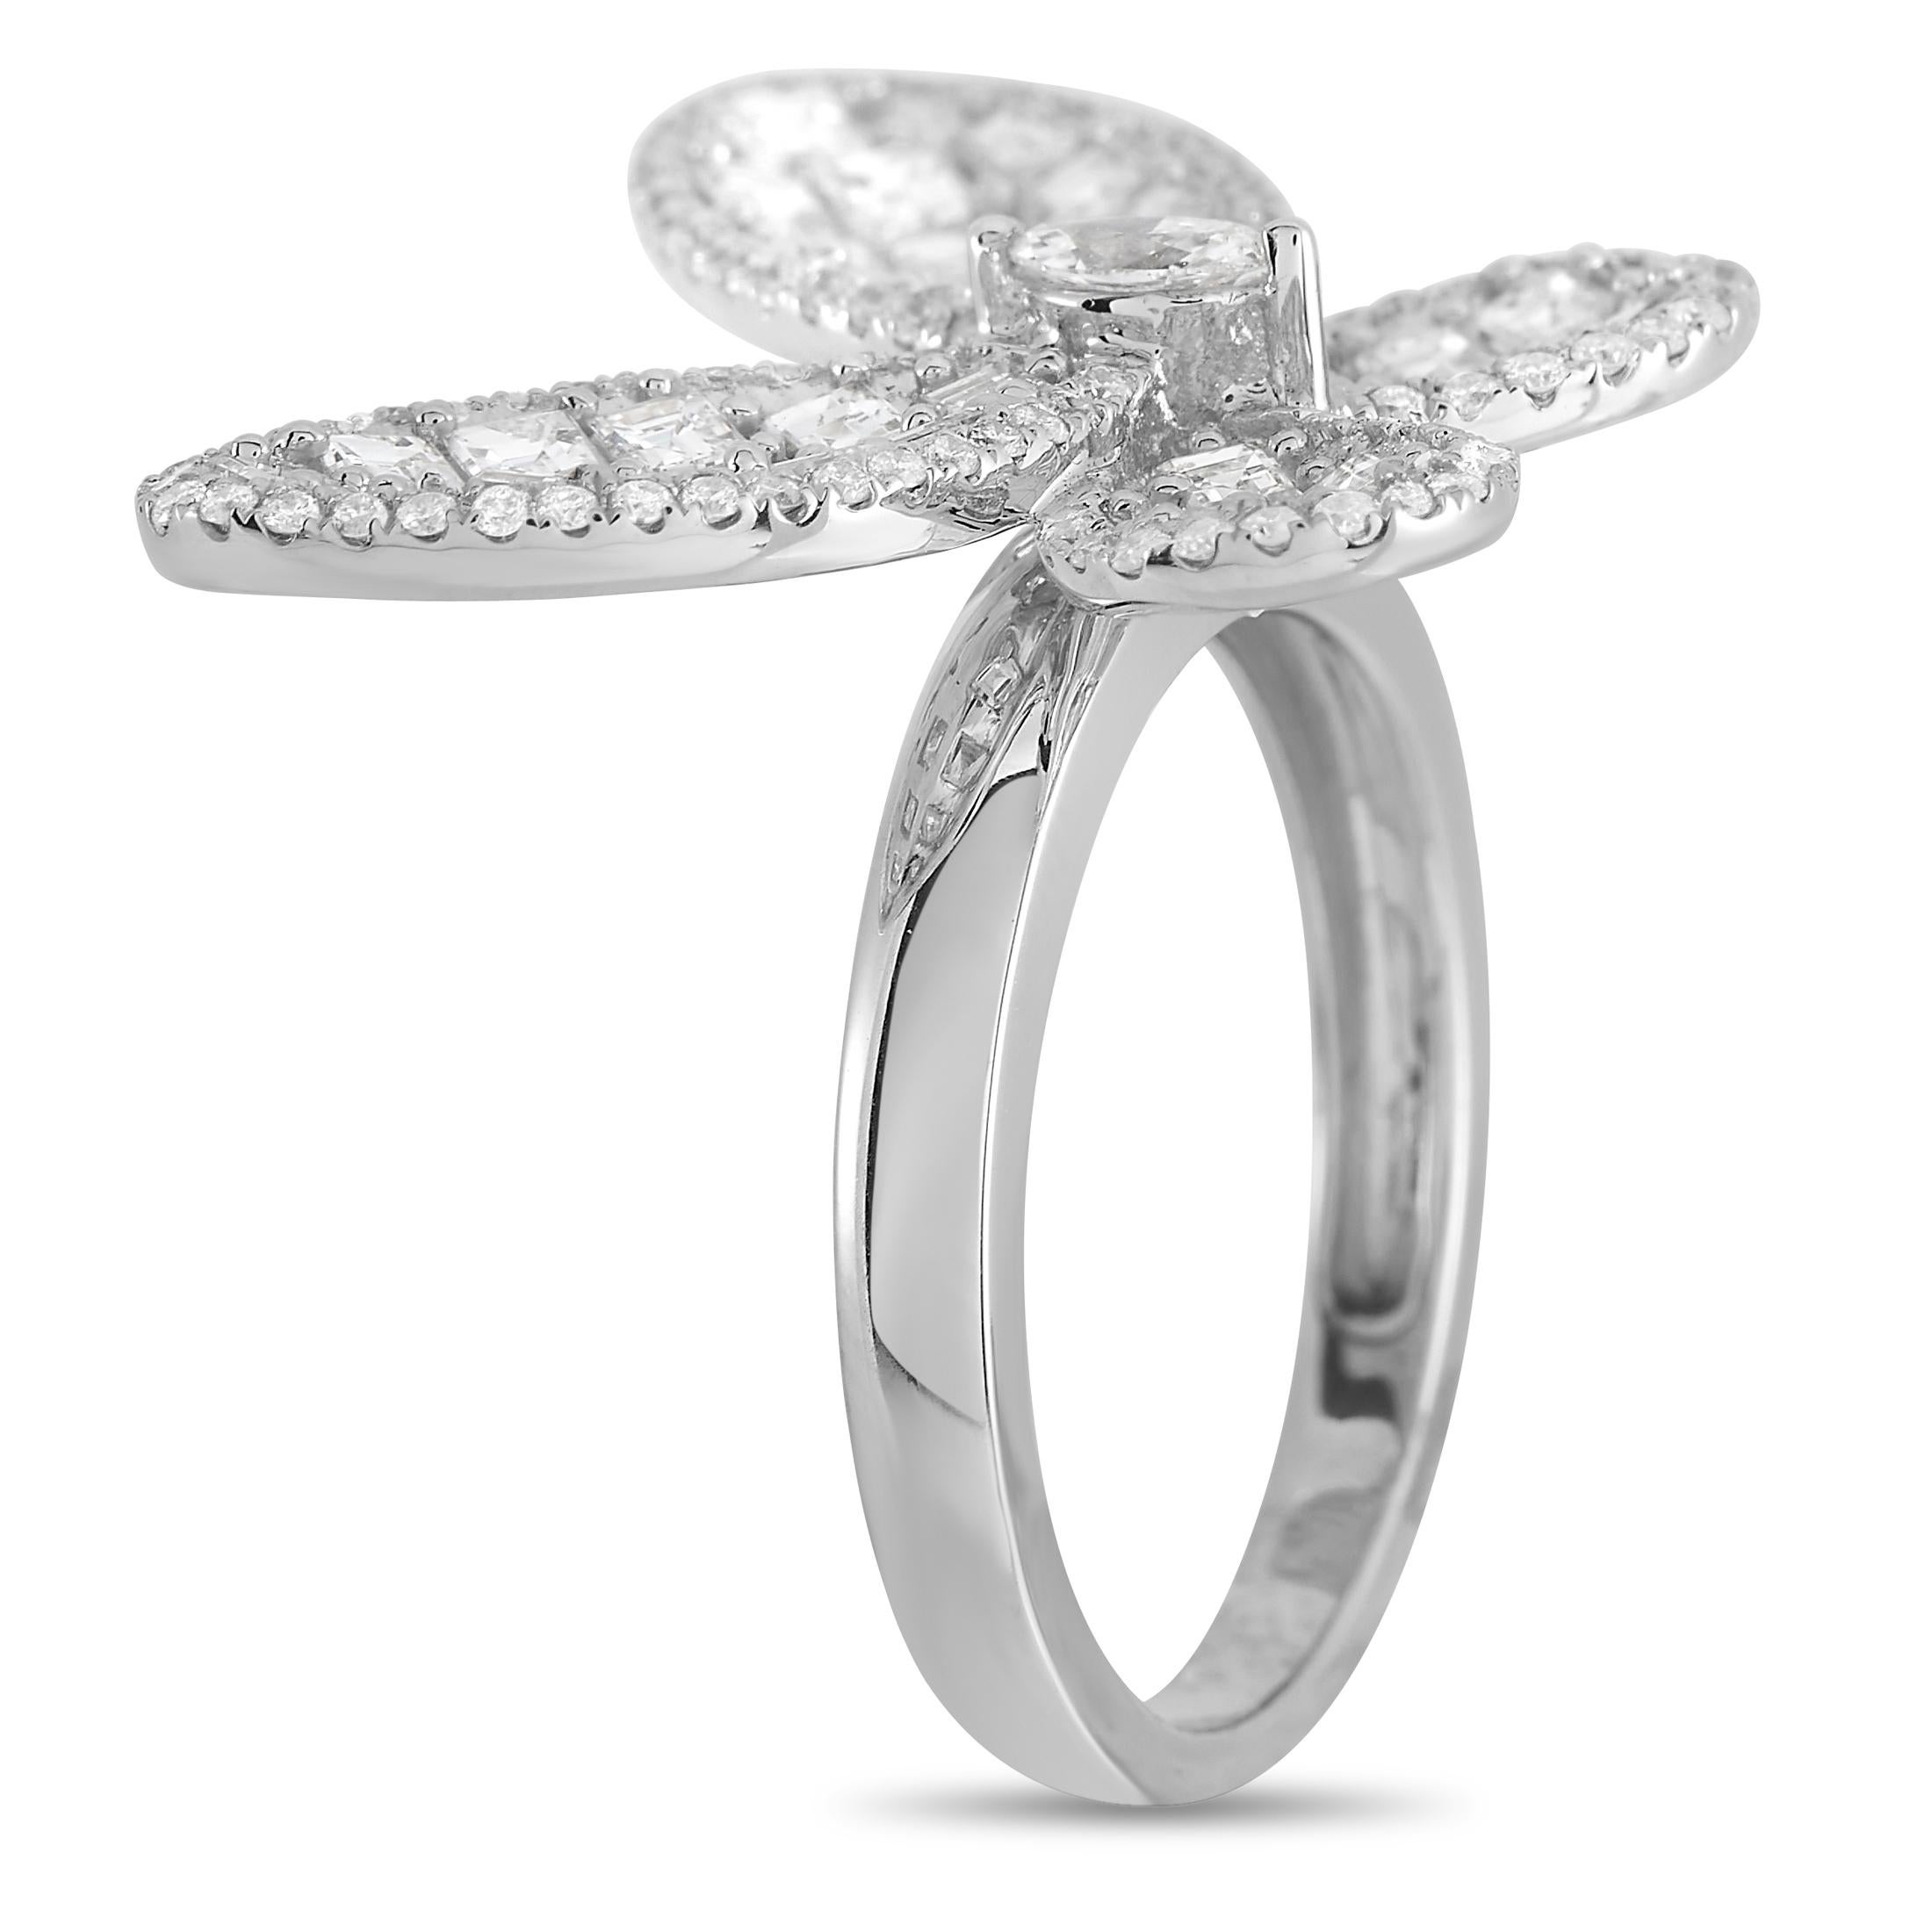 This 18K white gold ring is endless charming. A breathtaking butterfly comes to life thanks to an array of diamonds totaling 1.93 carats, including a 0.10 carat marquise cut center diamond surrounded by 1.47 carats of asscher cut diamonds that are